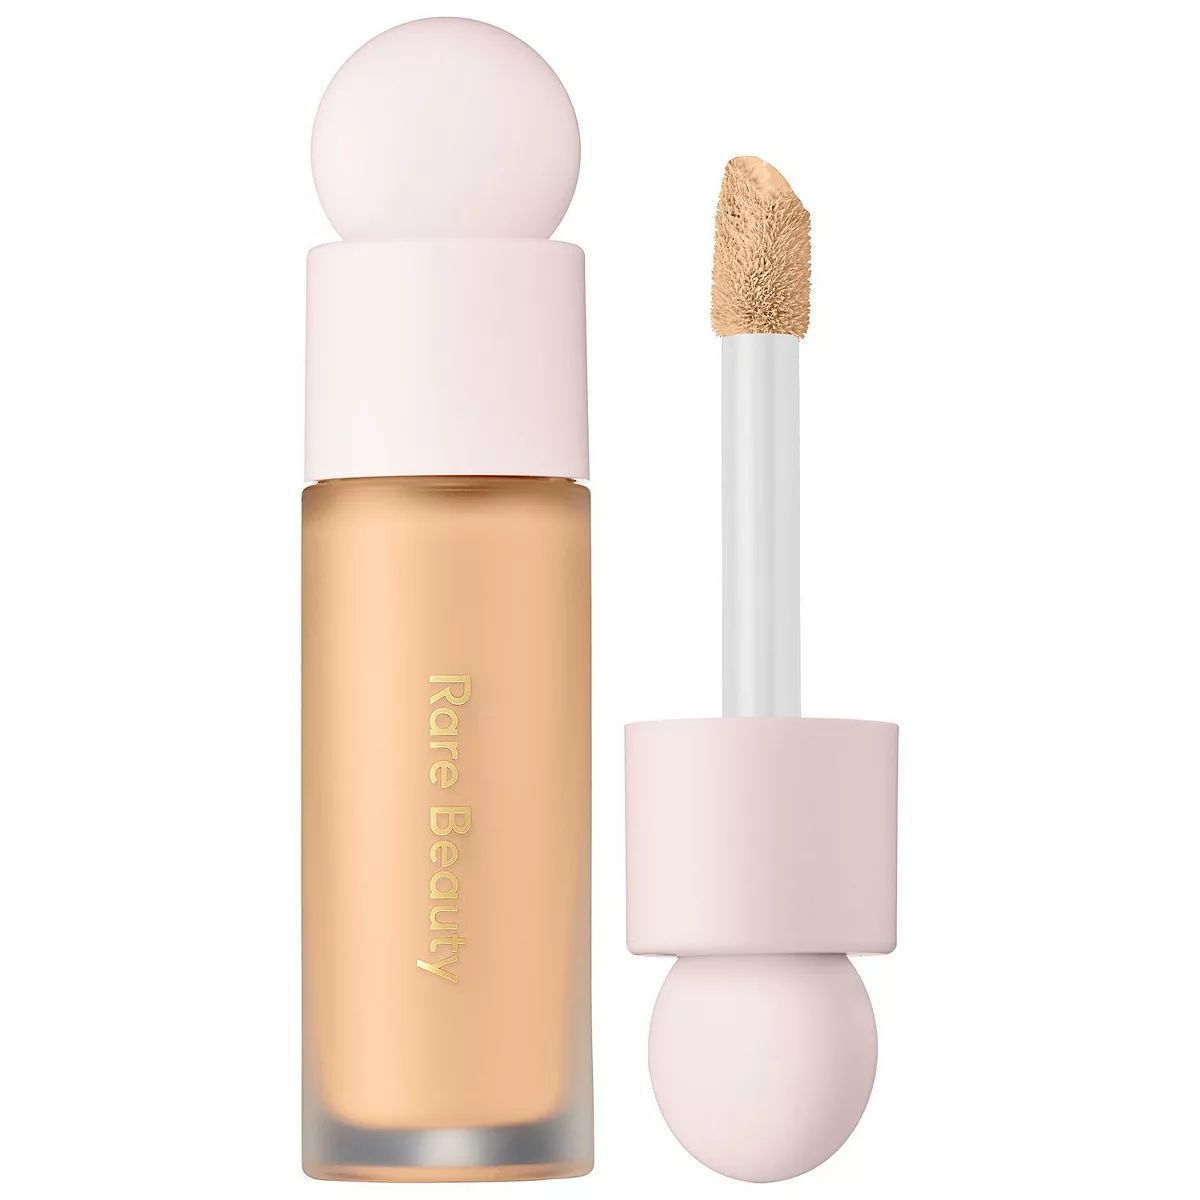 Rare Beauty by Selena Gomez Liquid Touch Brightening Concealer | Kohl's